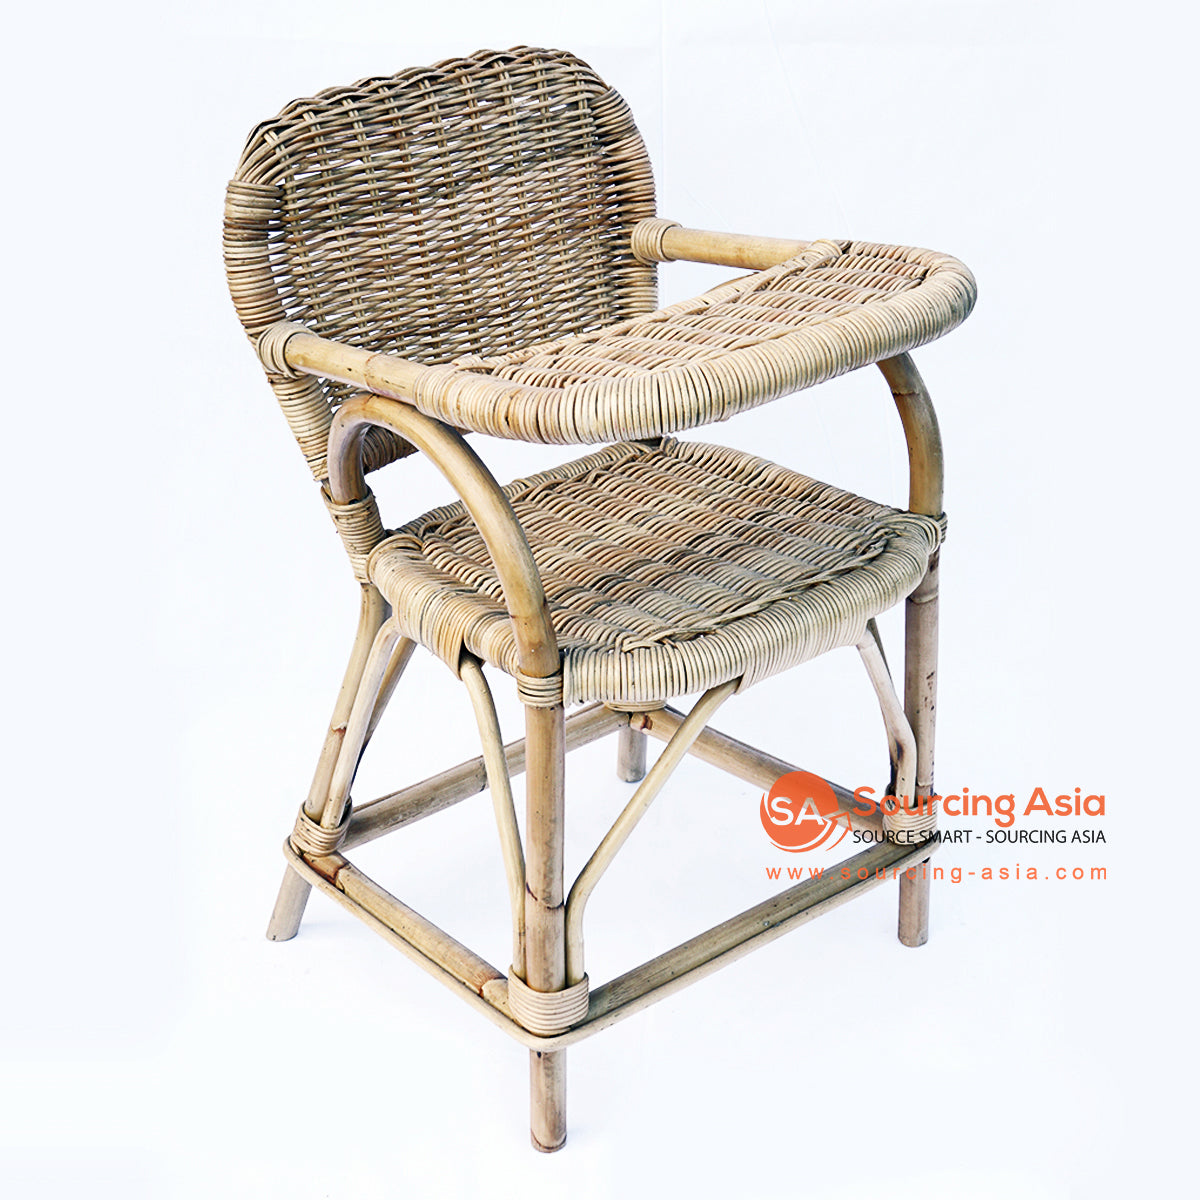 BNTC001-15 NATURAL RATTAN BABY CHAIR